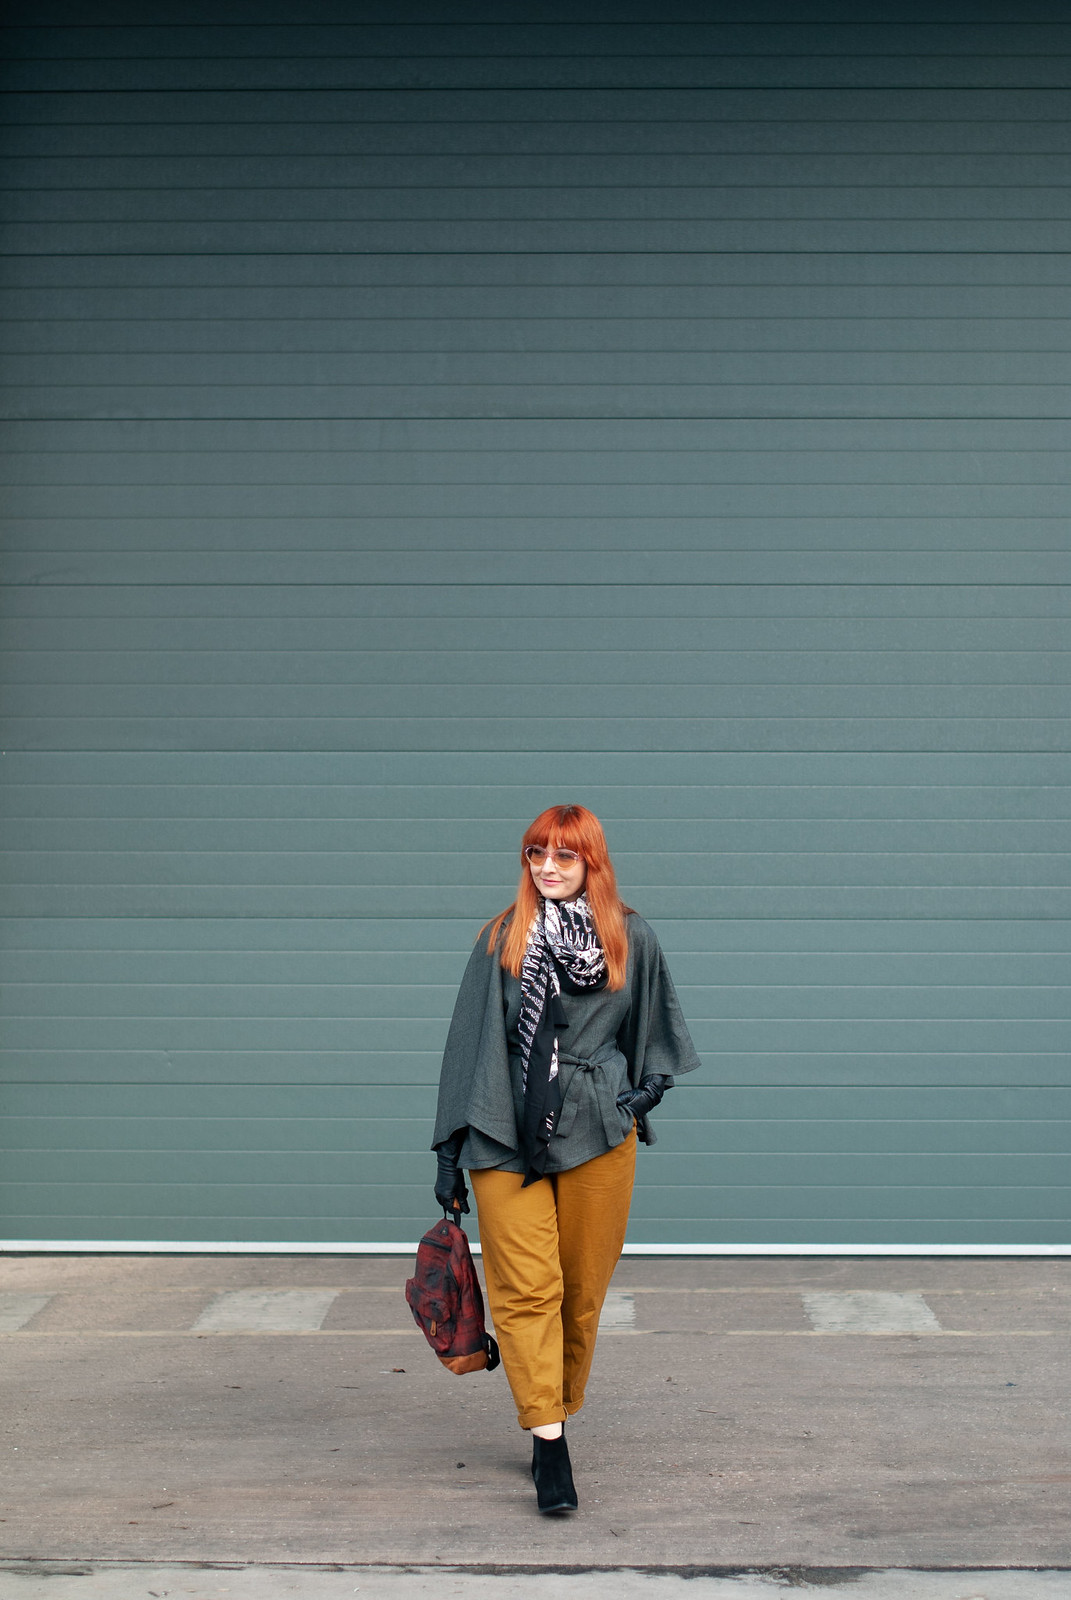 How to Make a Plain Grey Poncho Much More Exciting \ with mustard peg leg trousers \ giraffe print scarf \ black ankle boots \ tartan plaid backpack \ pastel sunglasses | Not Dressed As Lamb, over 40 style